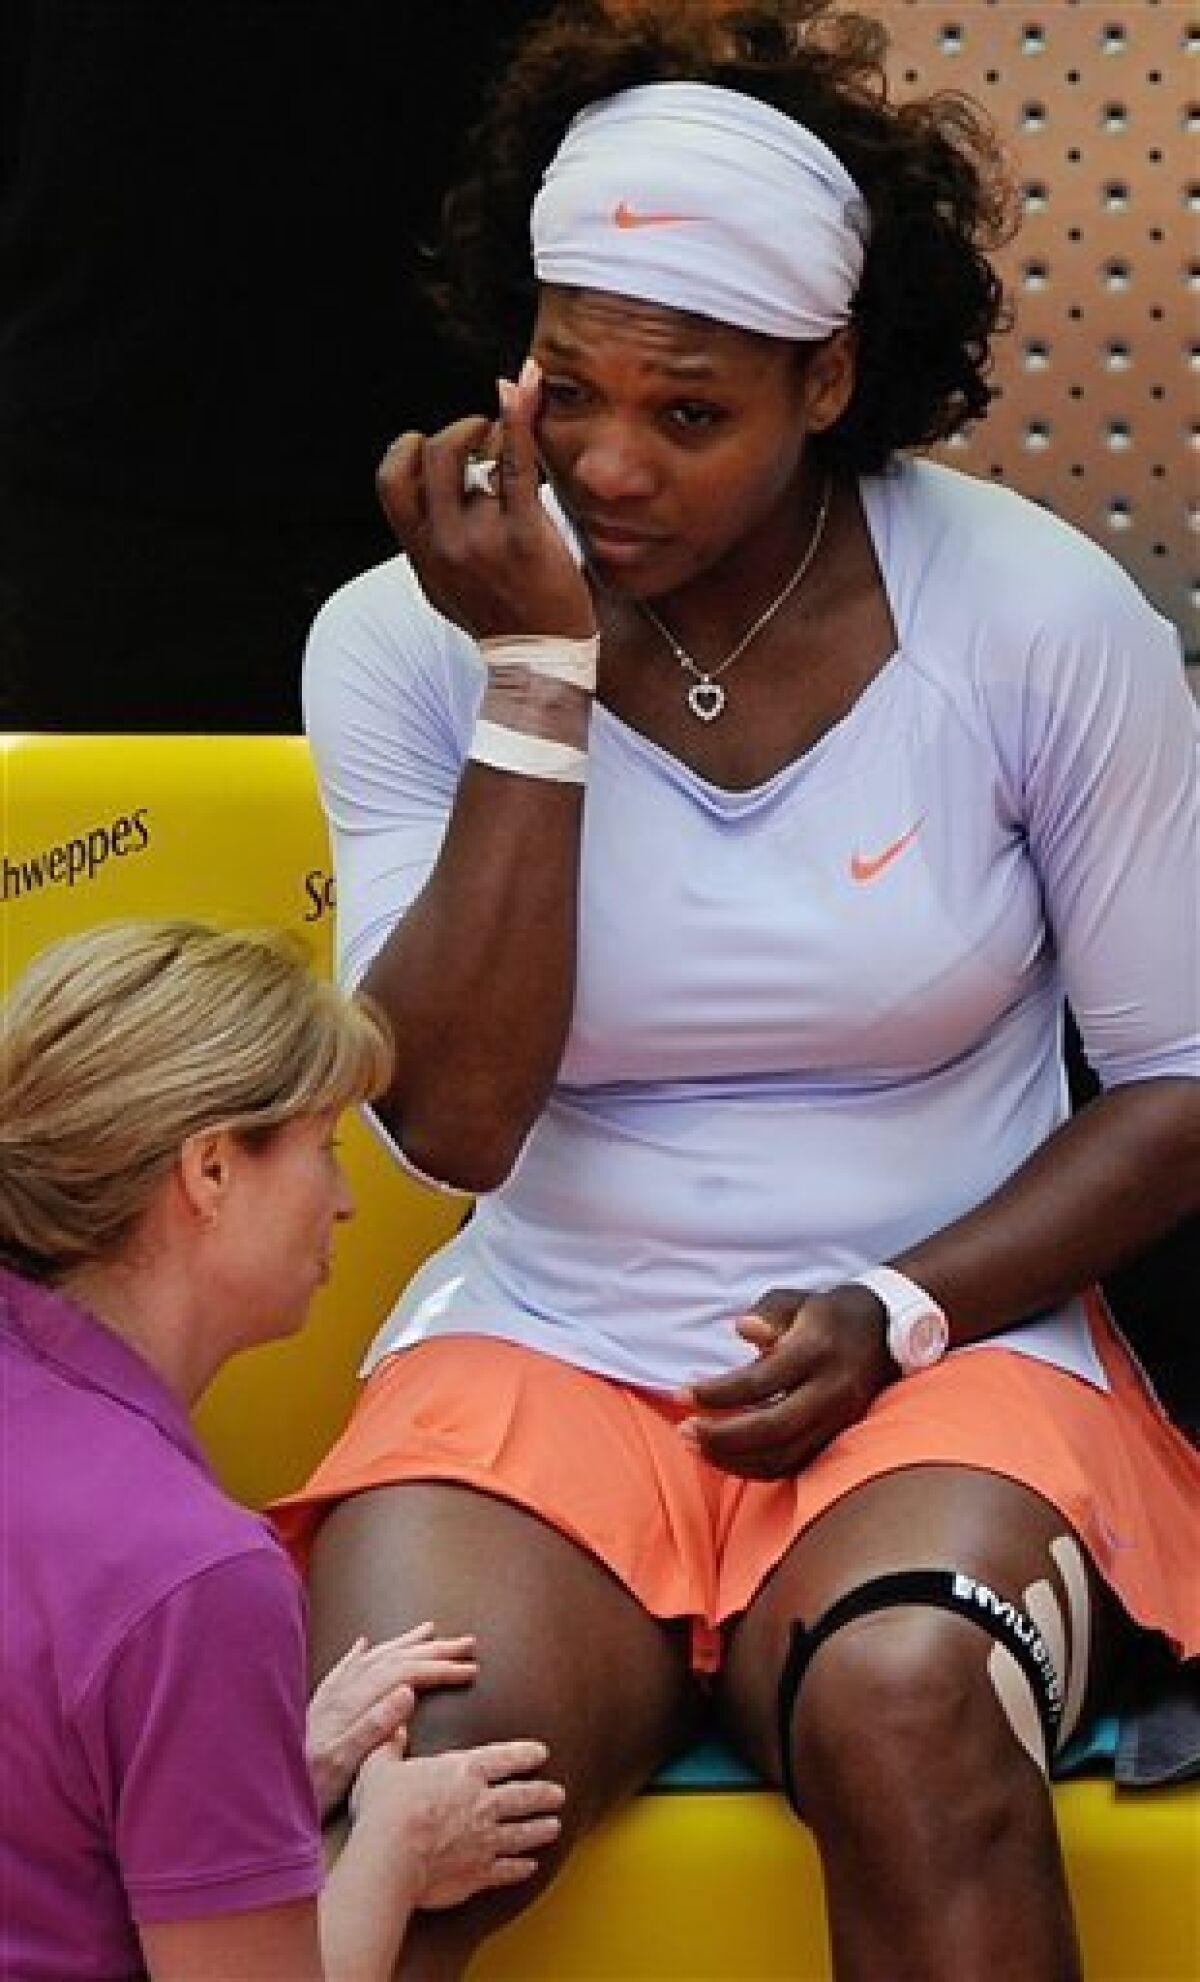 U.S. player Serena Williams is seen moments before retiring during her Madrid Open Tennis match against Francesca Schiavone from Italy in the Caja Magica in Madrid, Monday May 11, 2009.(AP Photo/Daniel Ochoa de Olza)